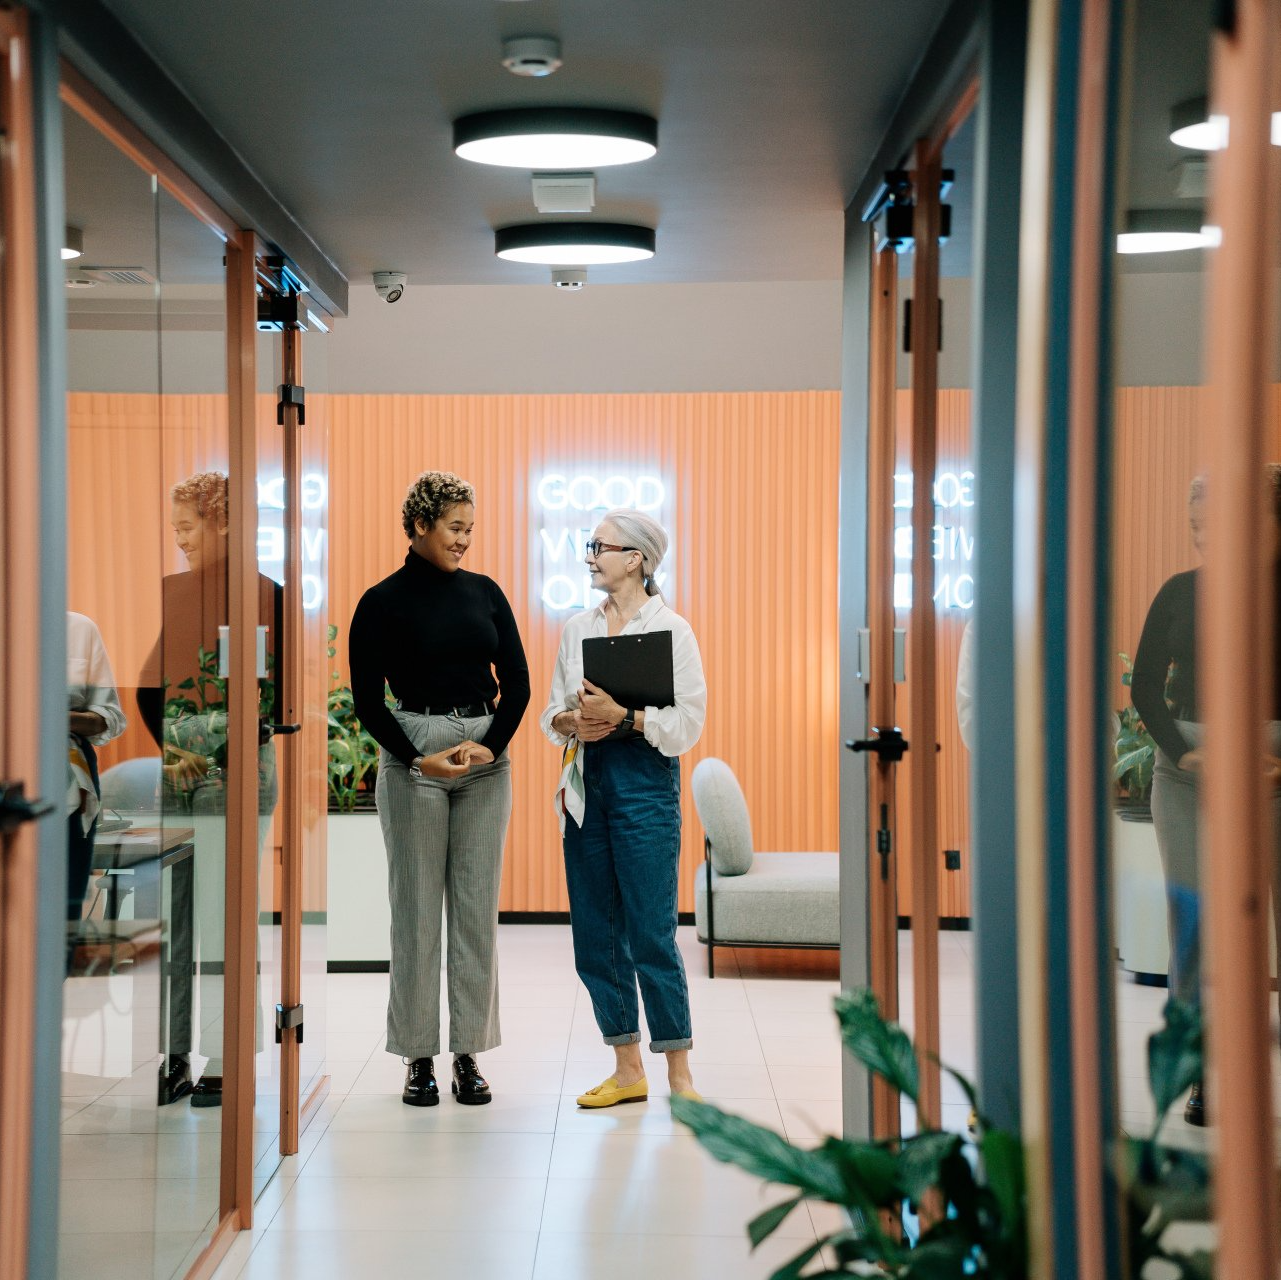 Two employees standing in a hallway talking